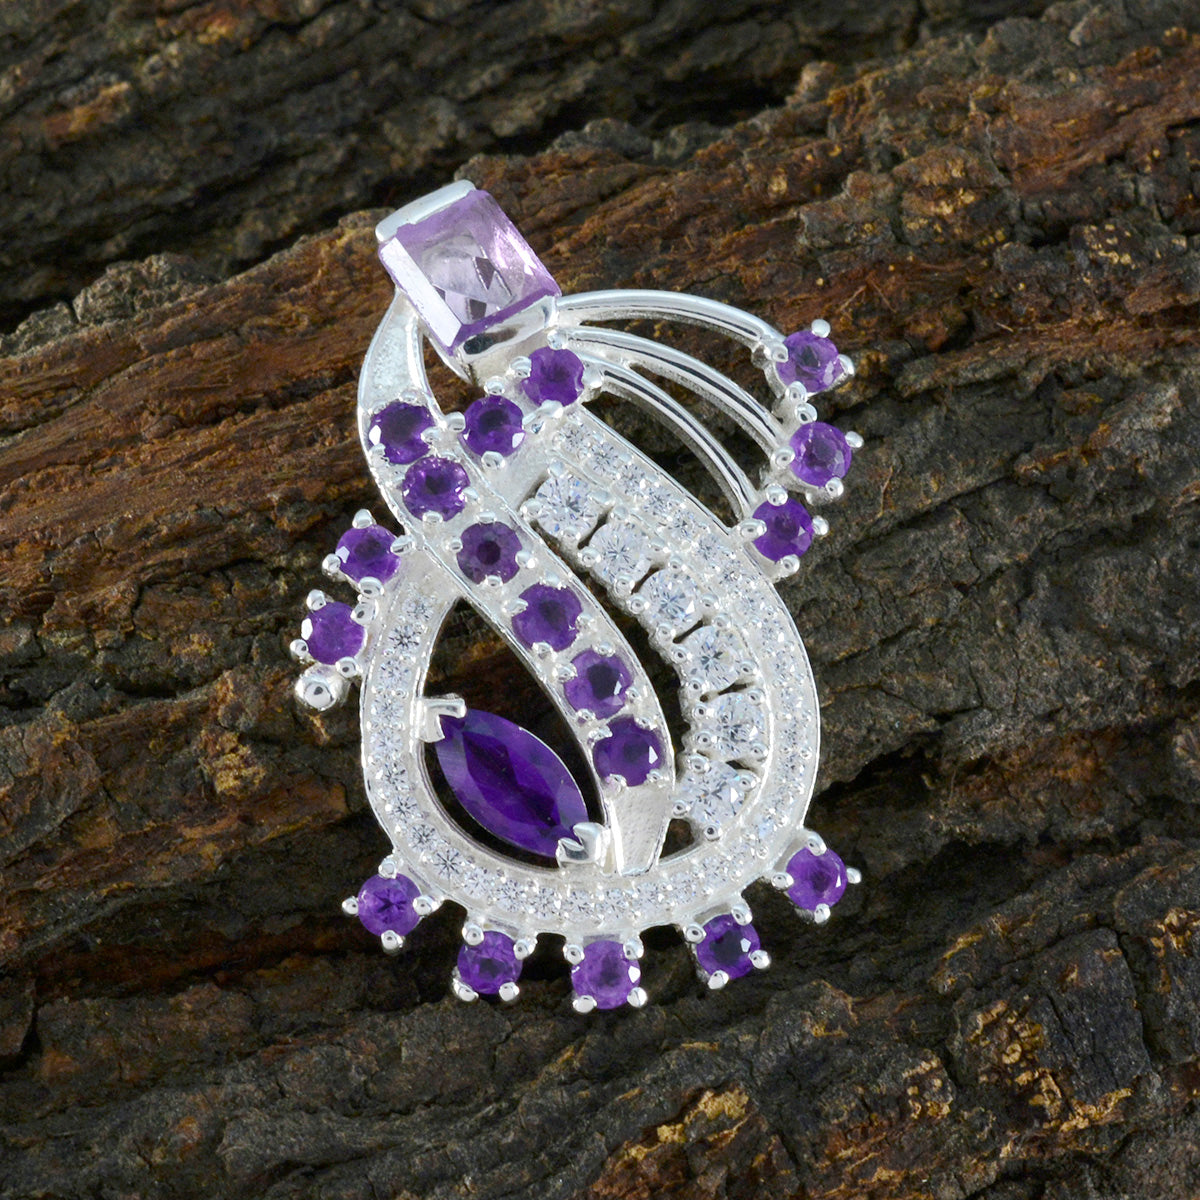 Riyo Winsome Gemstone Multi Faceted Purple Amethyst Sterling Silver Pendant Gift For Friend